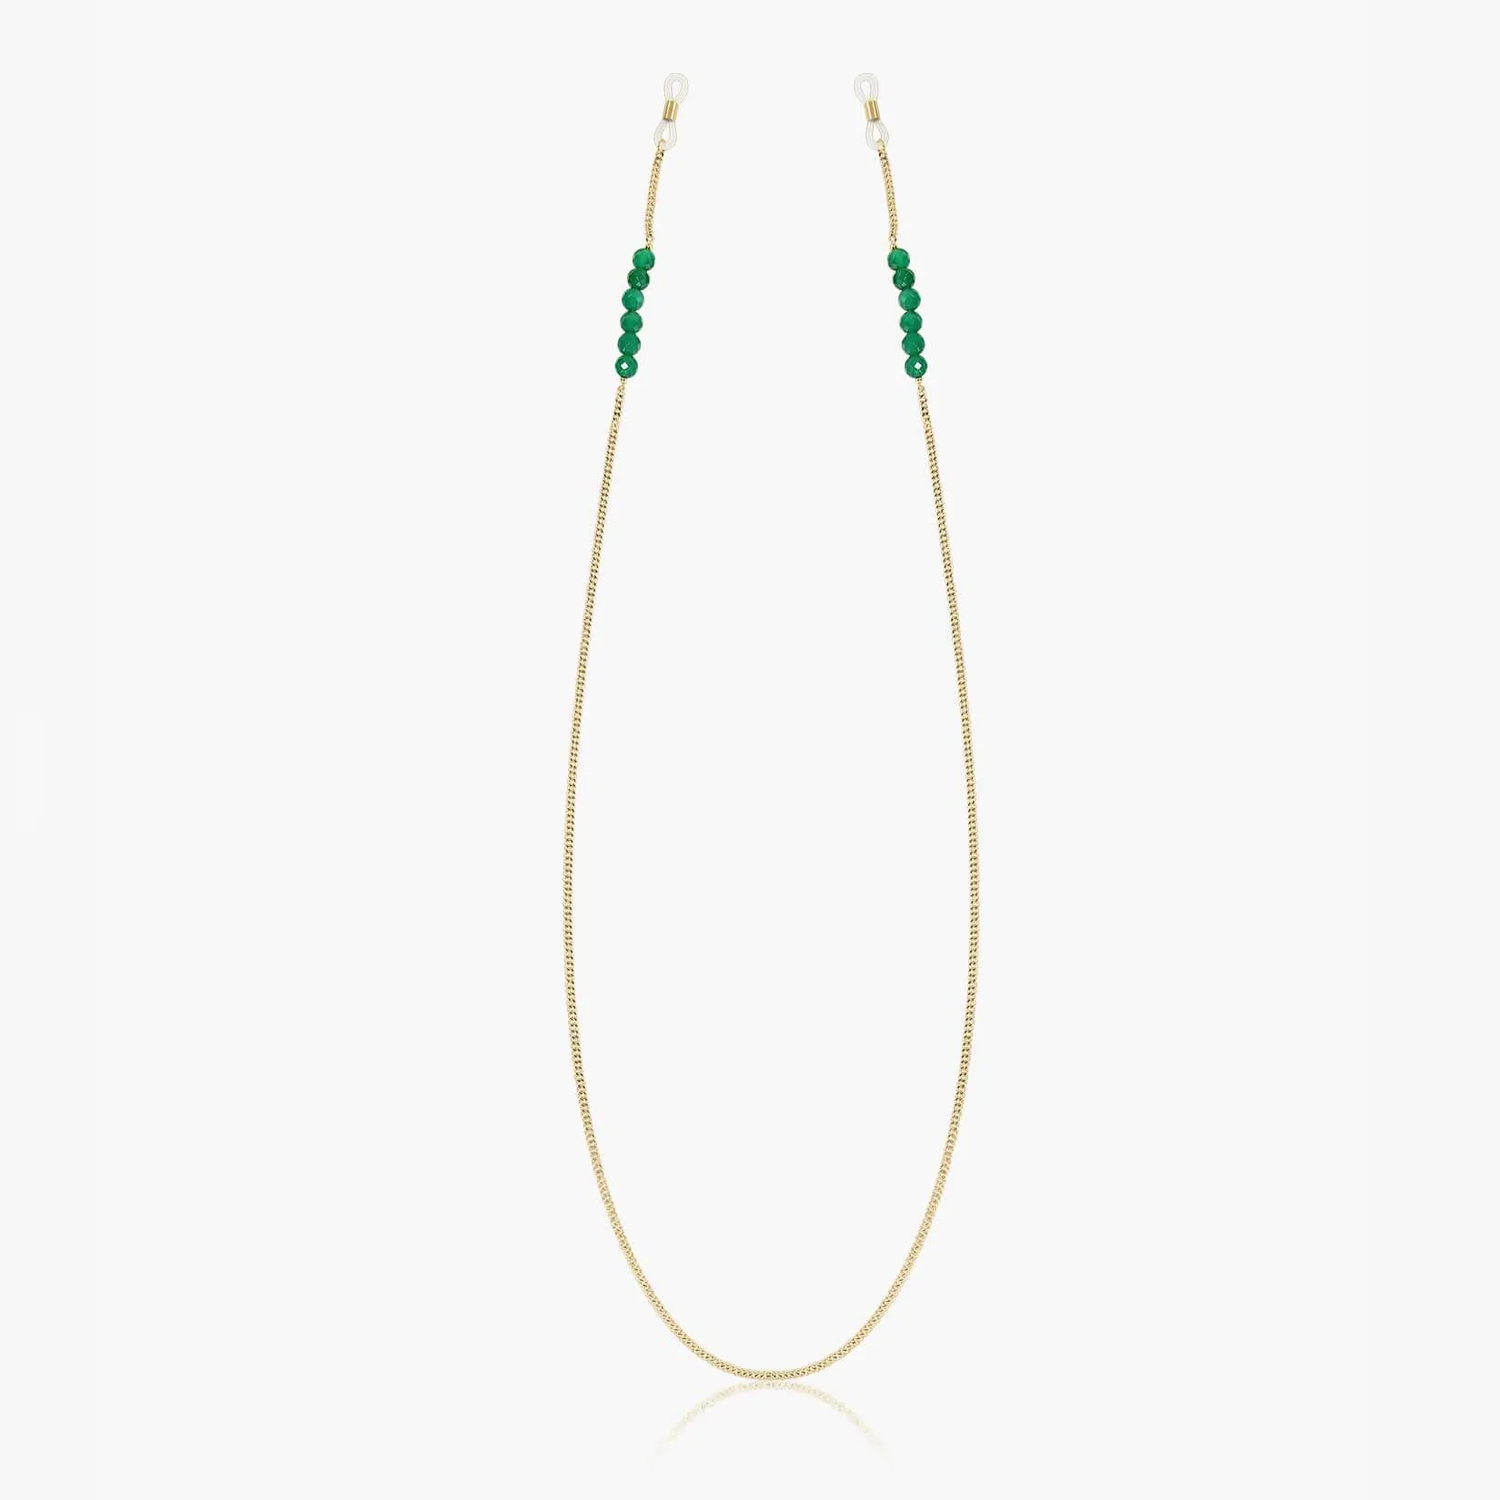 Silver chain for Coco Glasses - Green Onyx